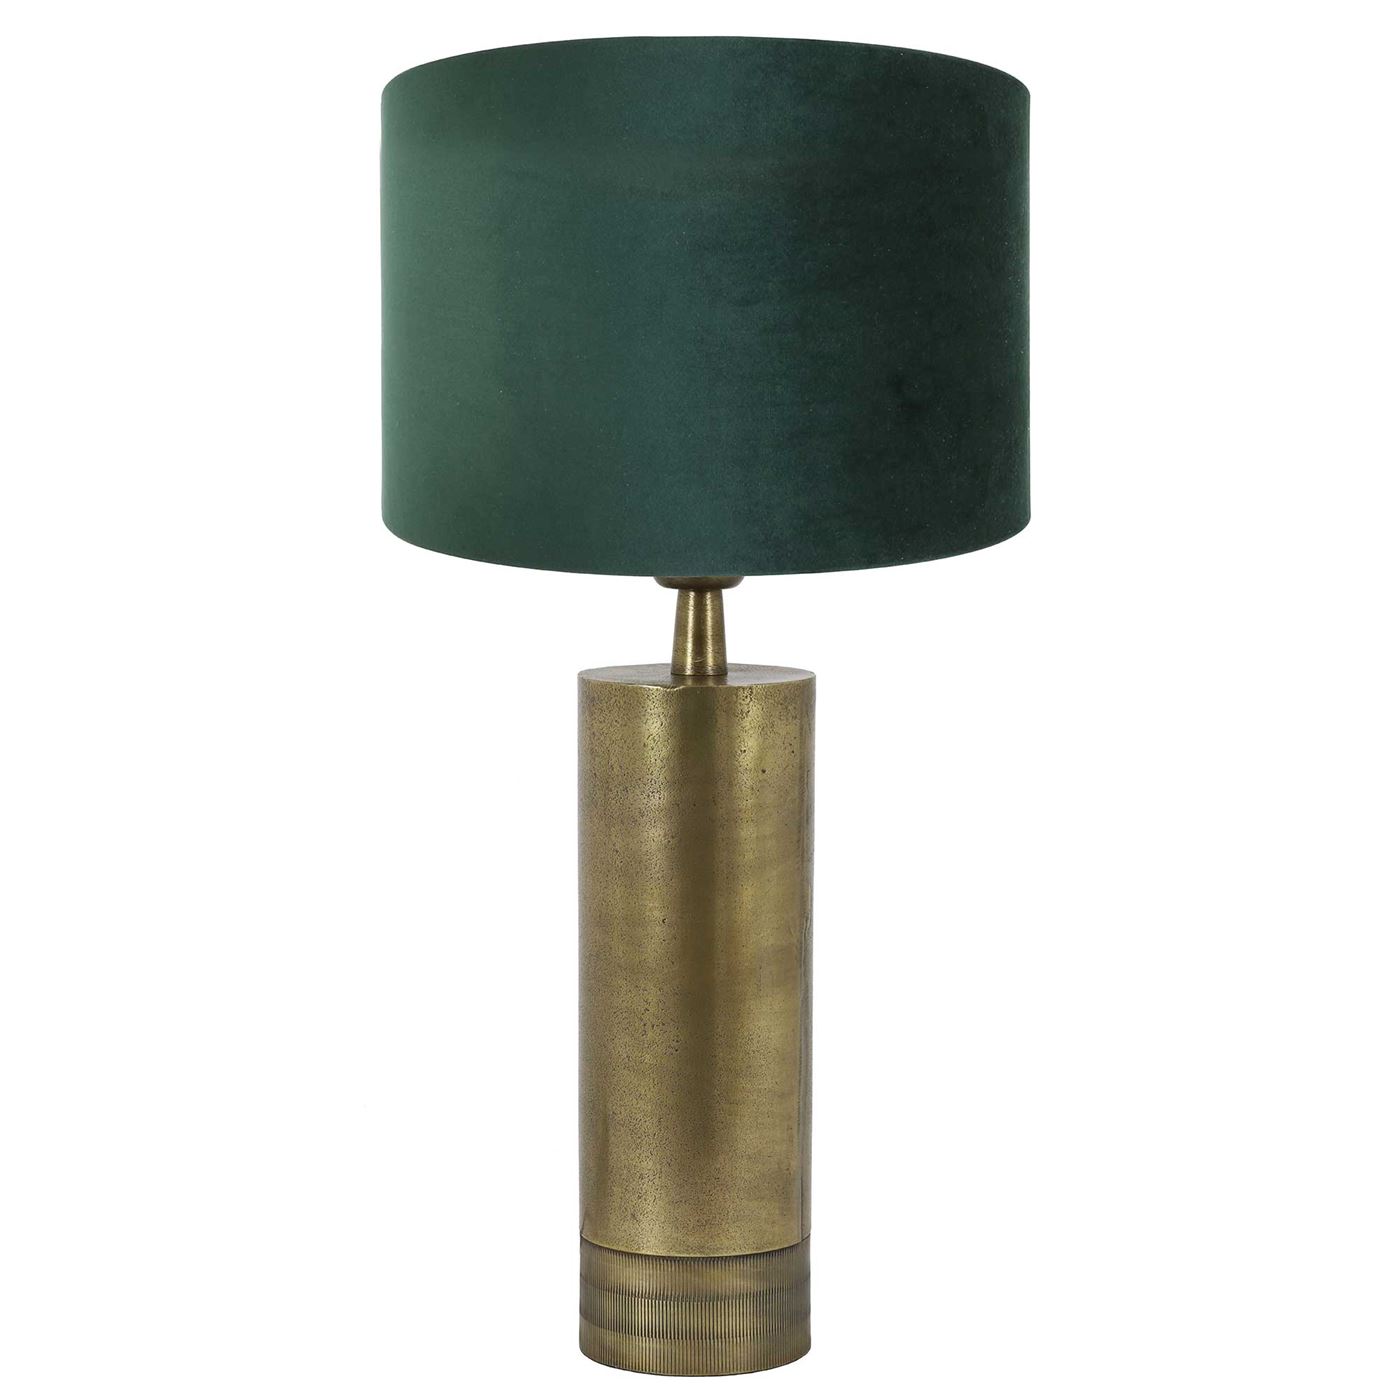 Anitique Bronze Table Lamp, Gold | Barker & Stonehouse